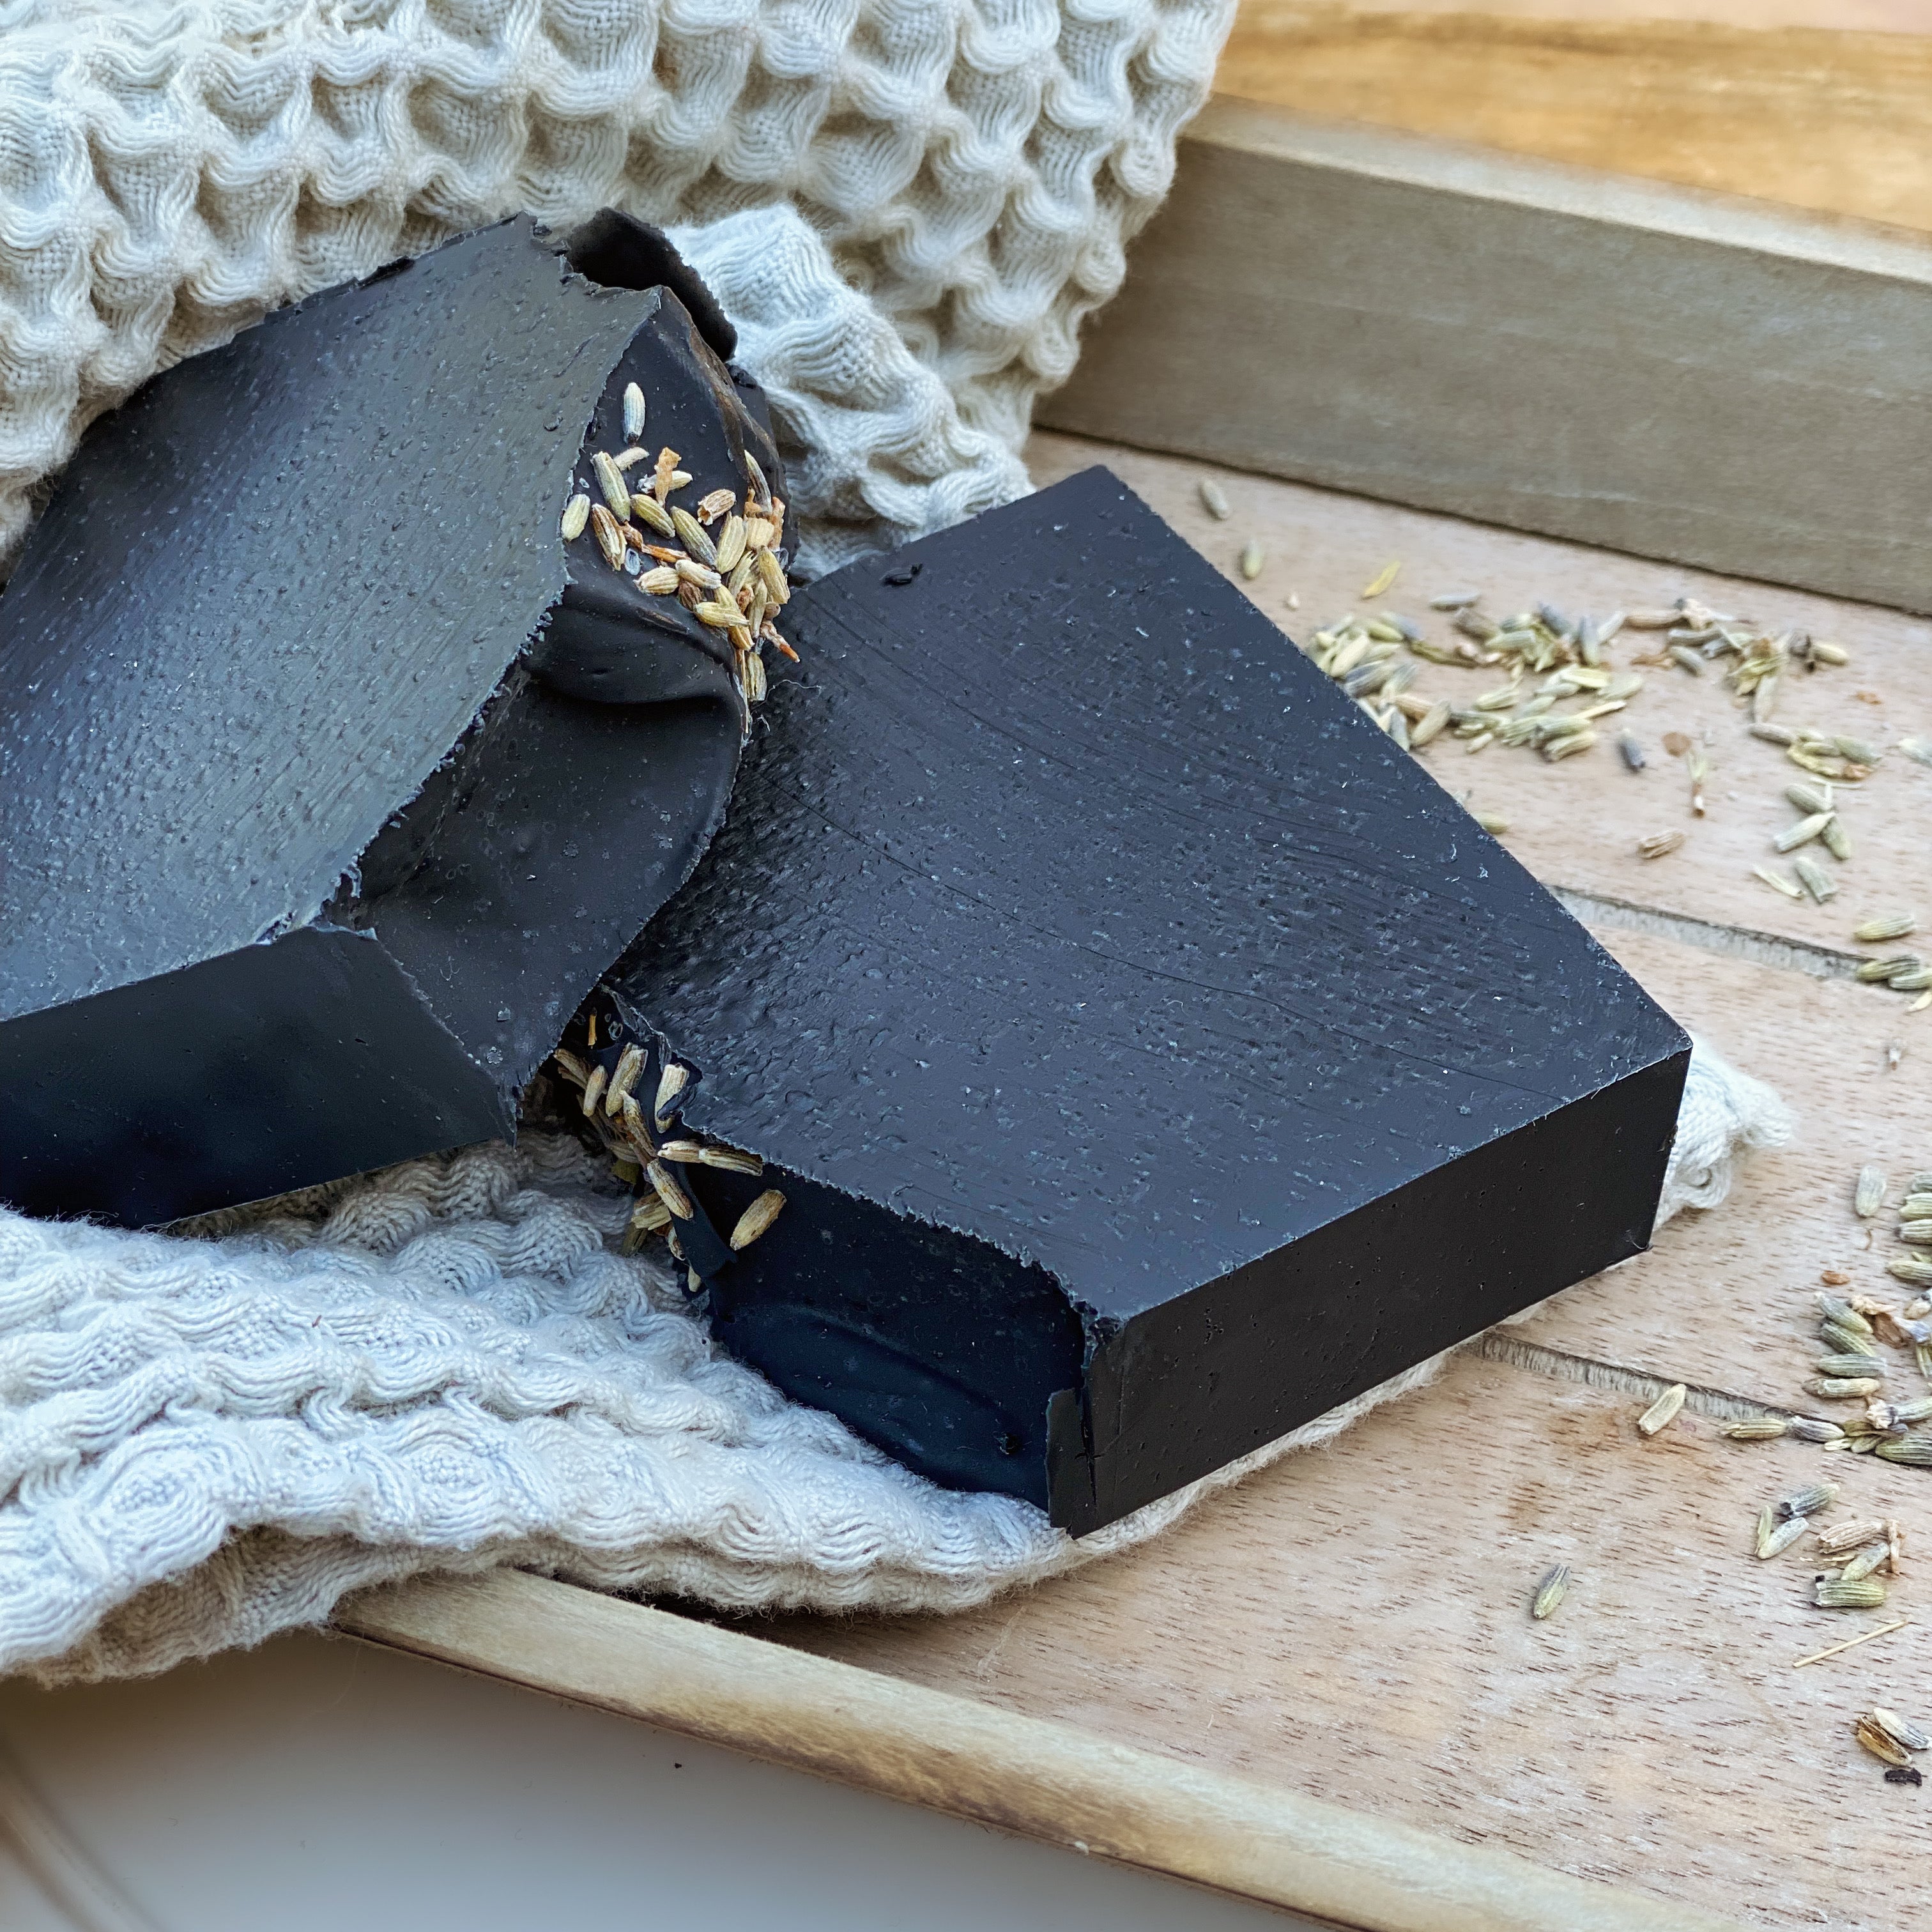 Hampshire Detox Soap - Deep Cleansing Activated Charcoal Soap with a Medicated Blend of Lavender and Tea Tree Essential Oils